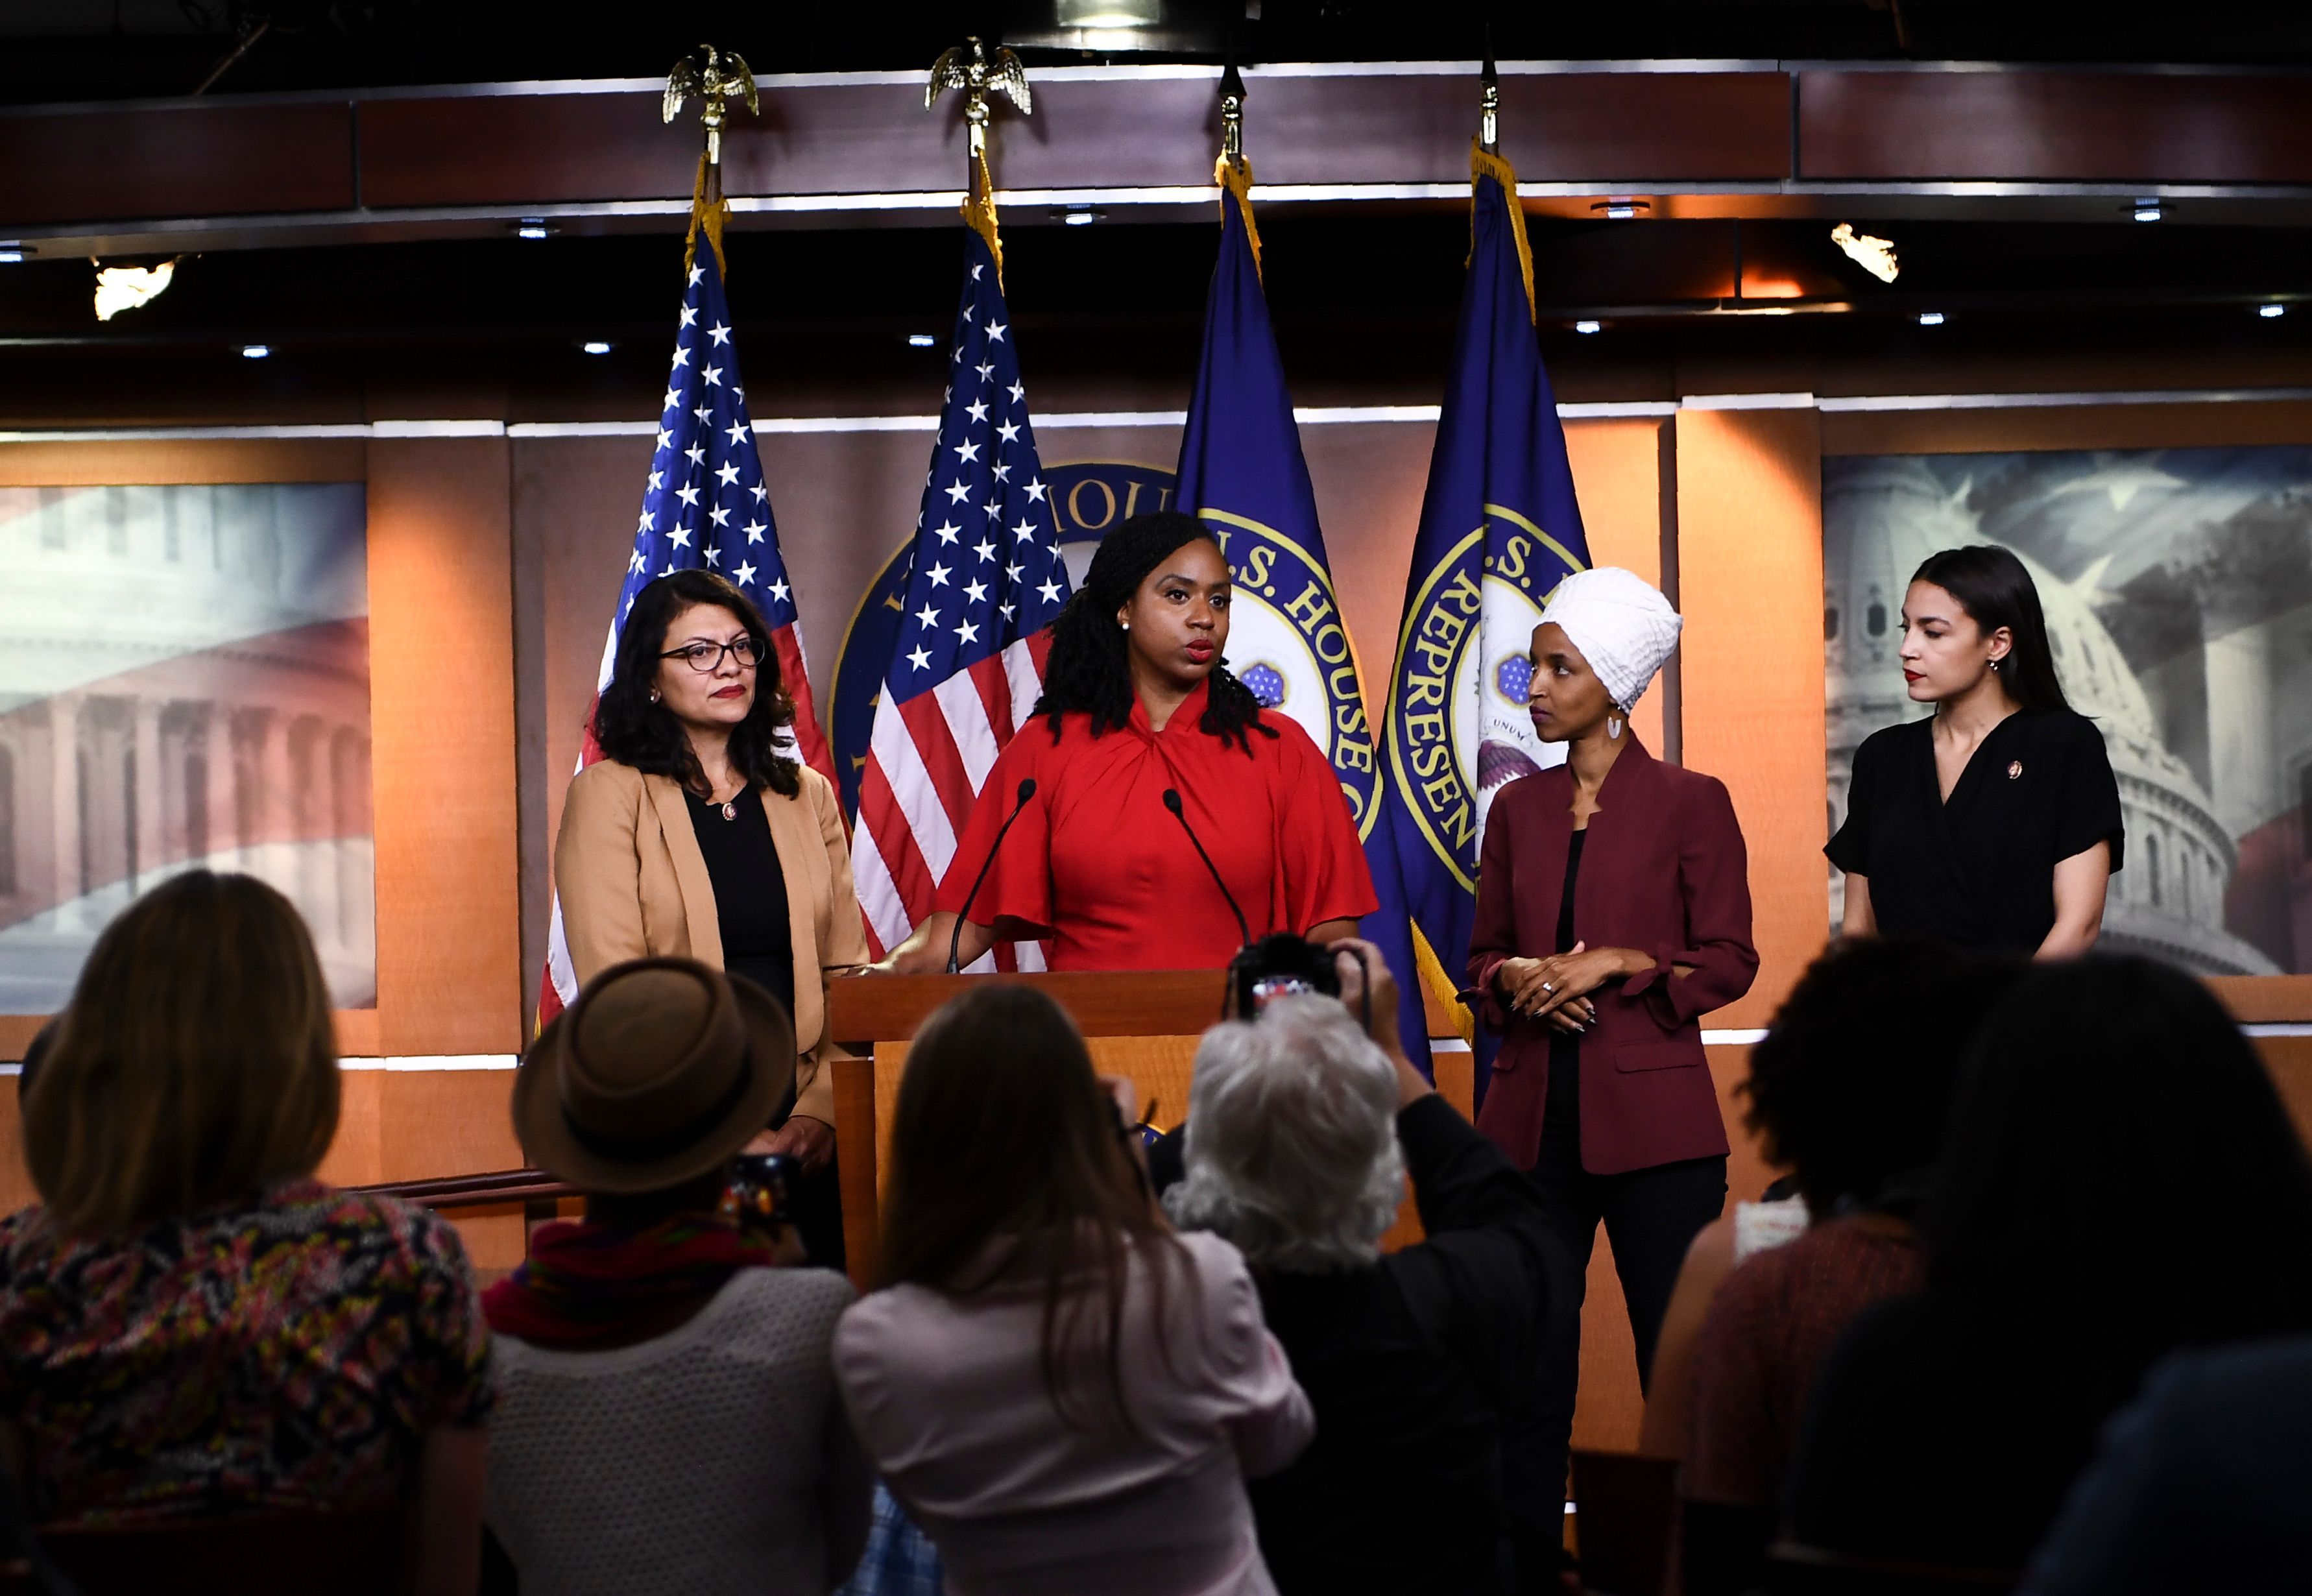 All four members of 'The Squad' were re-elected to Congress